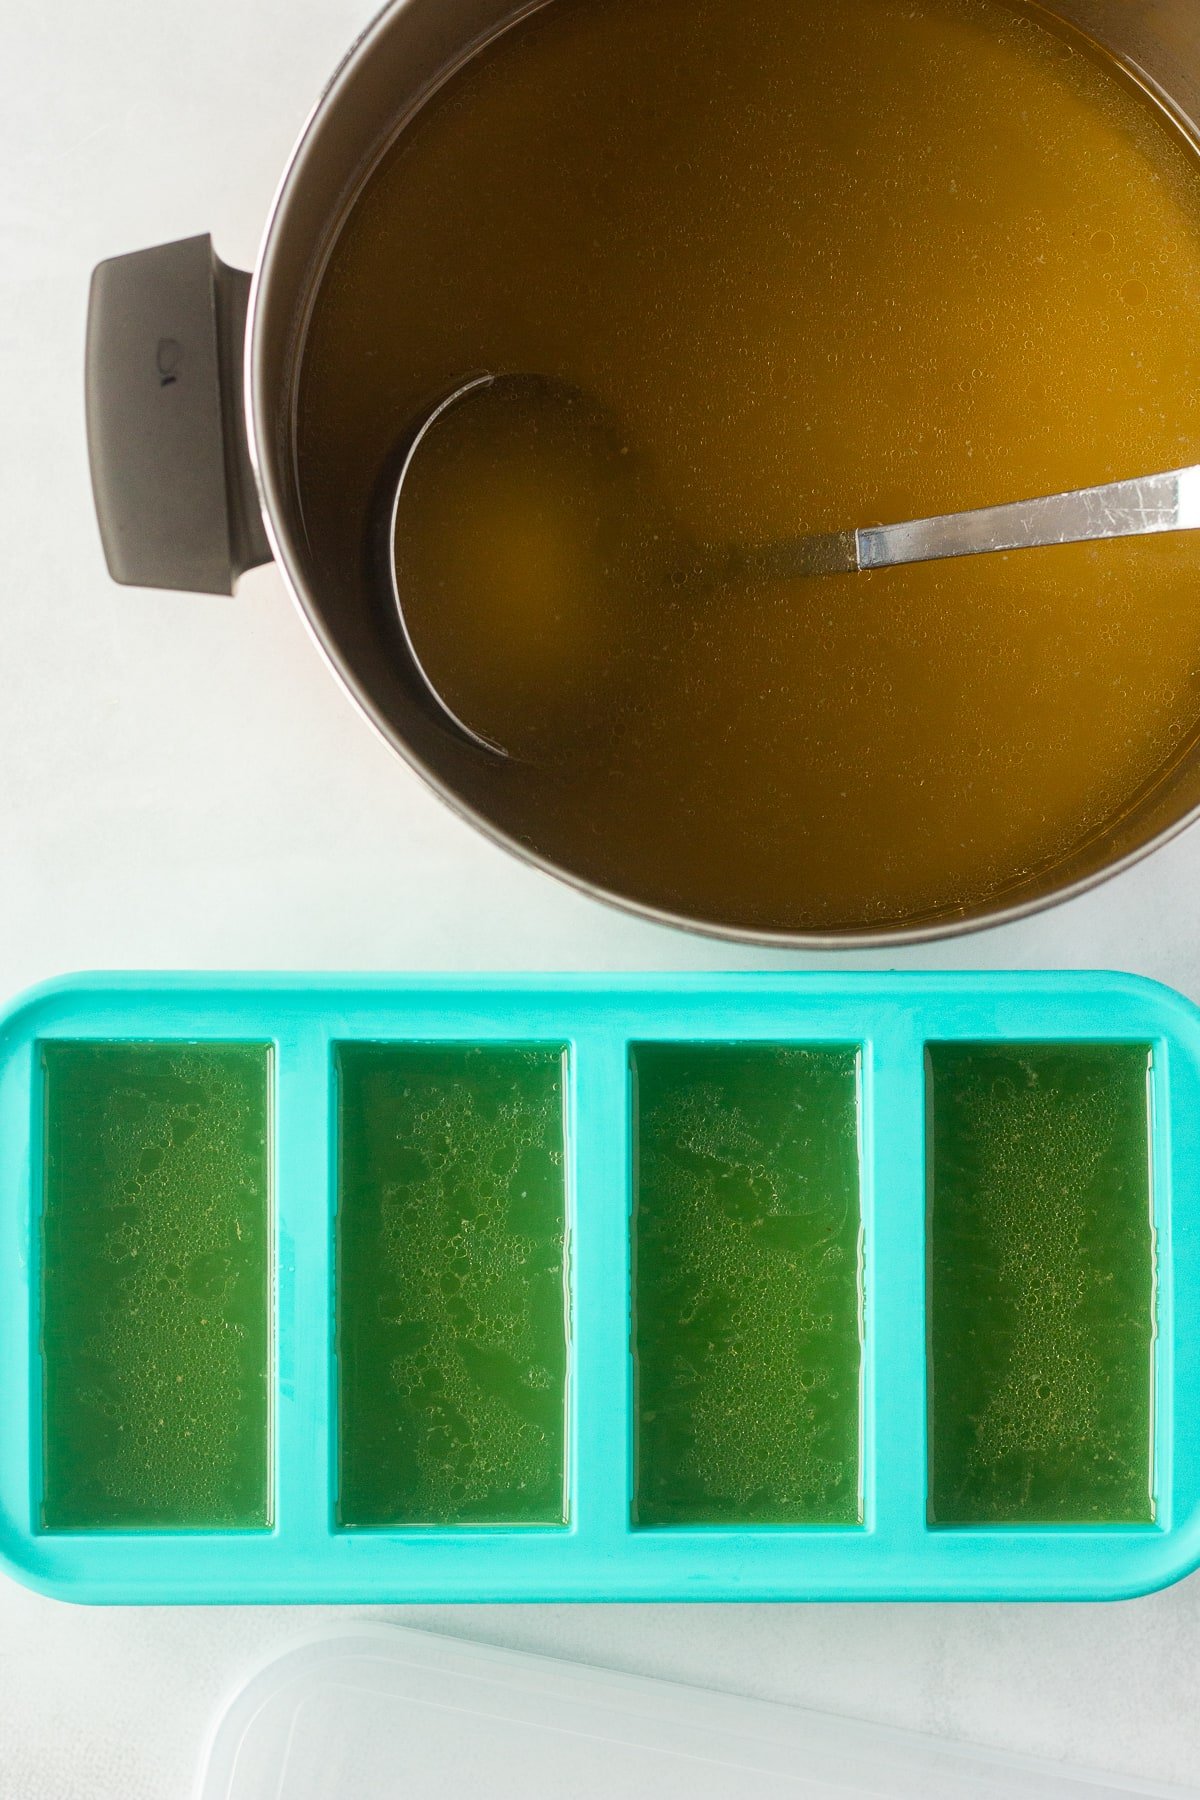 A top down shot of a pot with chicken broth in it next to blue silicone freezer molds to store the broth.